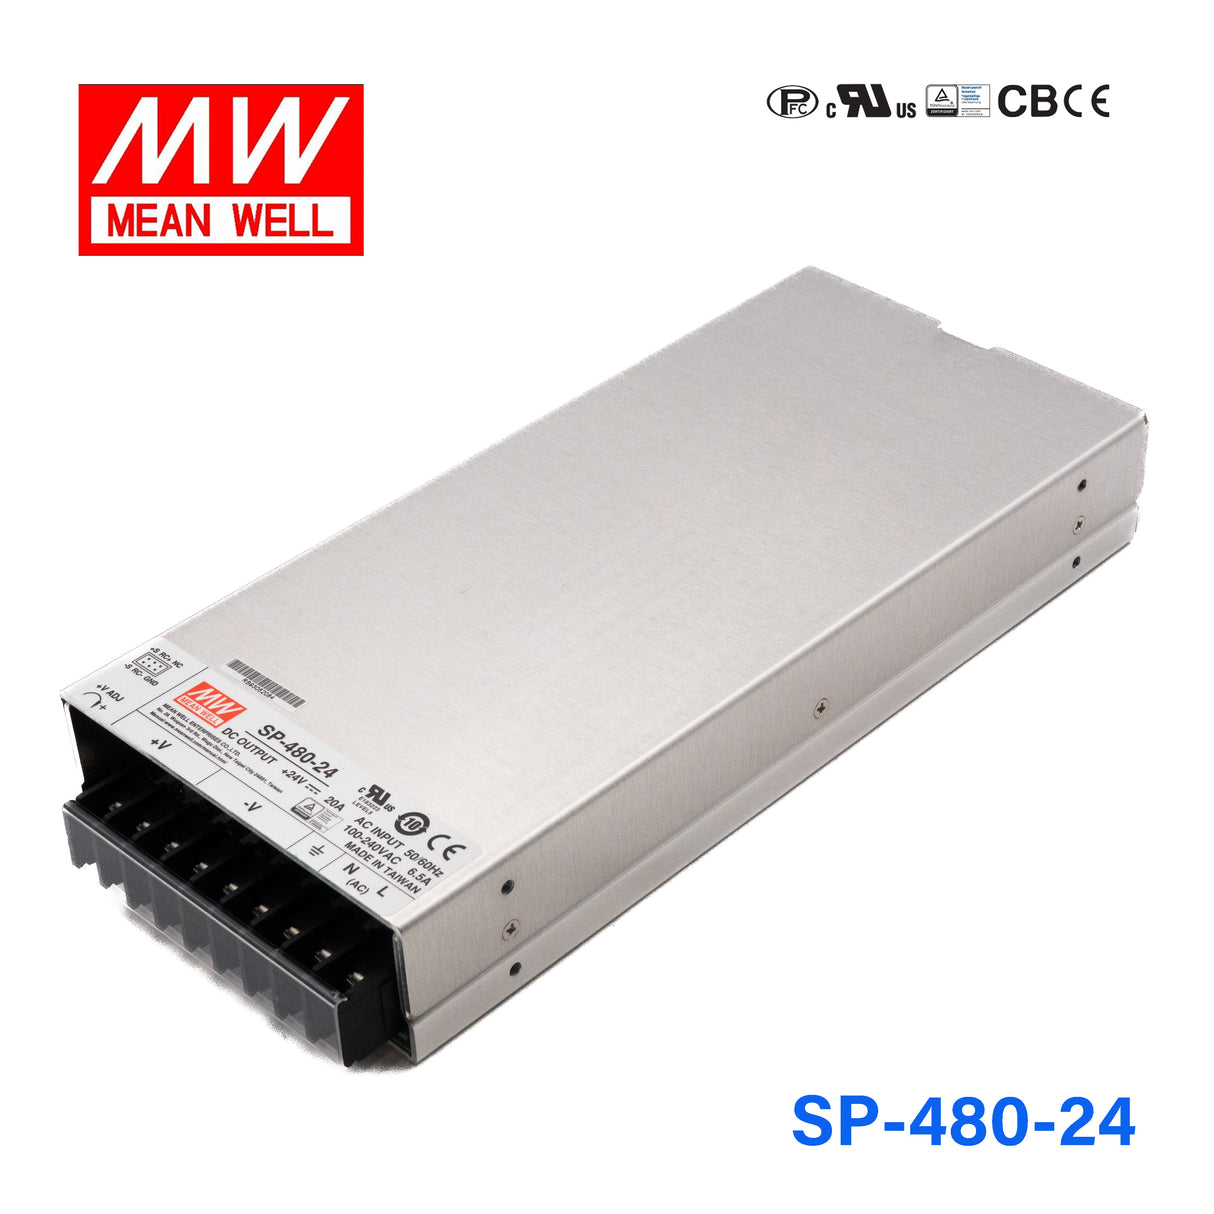 Mean Well SP-480-24 Power Supply 480W 24V